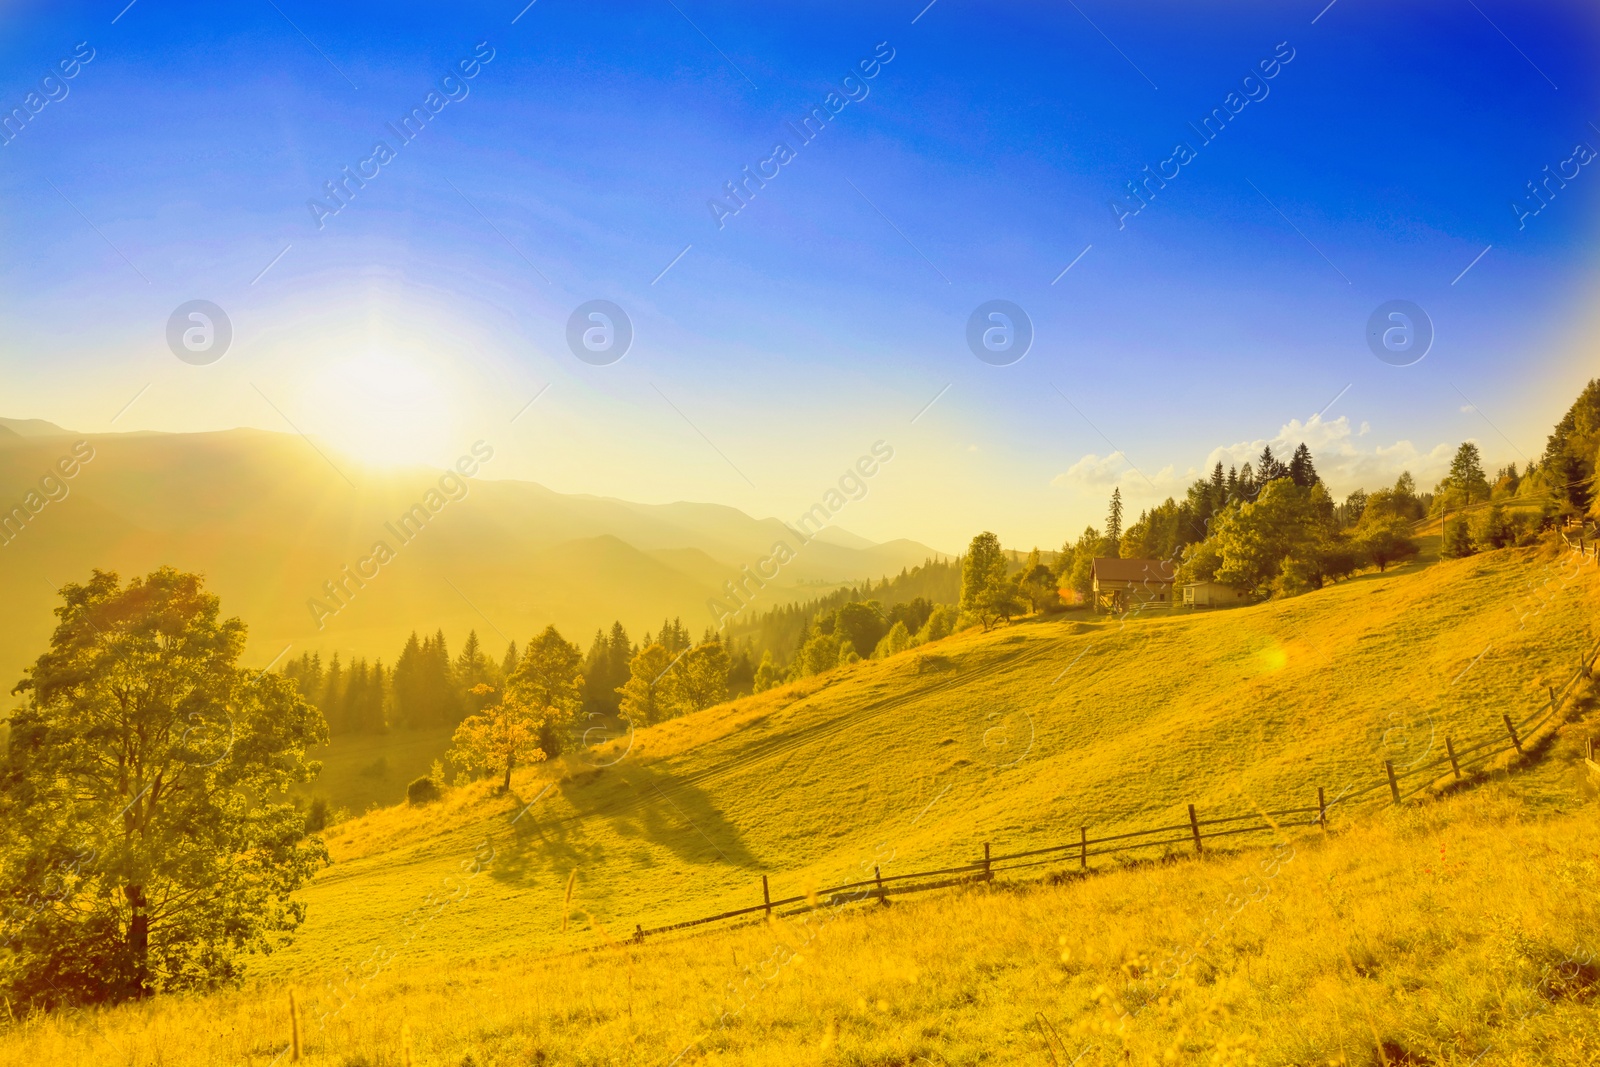 Image of Ukrainian flag. Picturesque view of yellow landscape under blue sky on sunny day